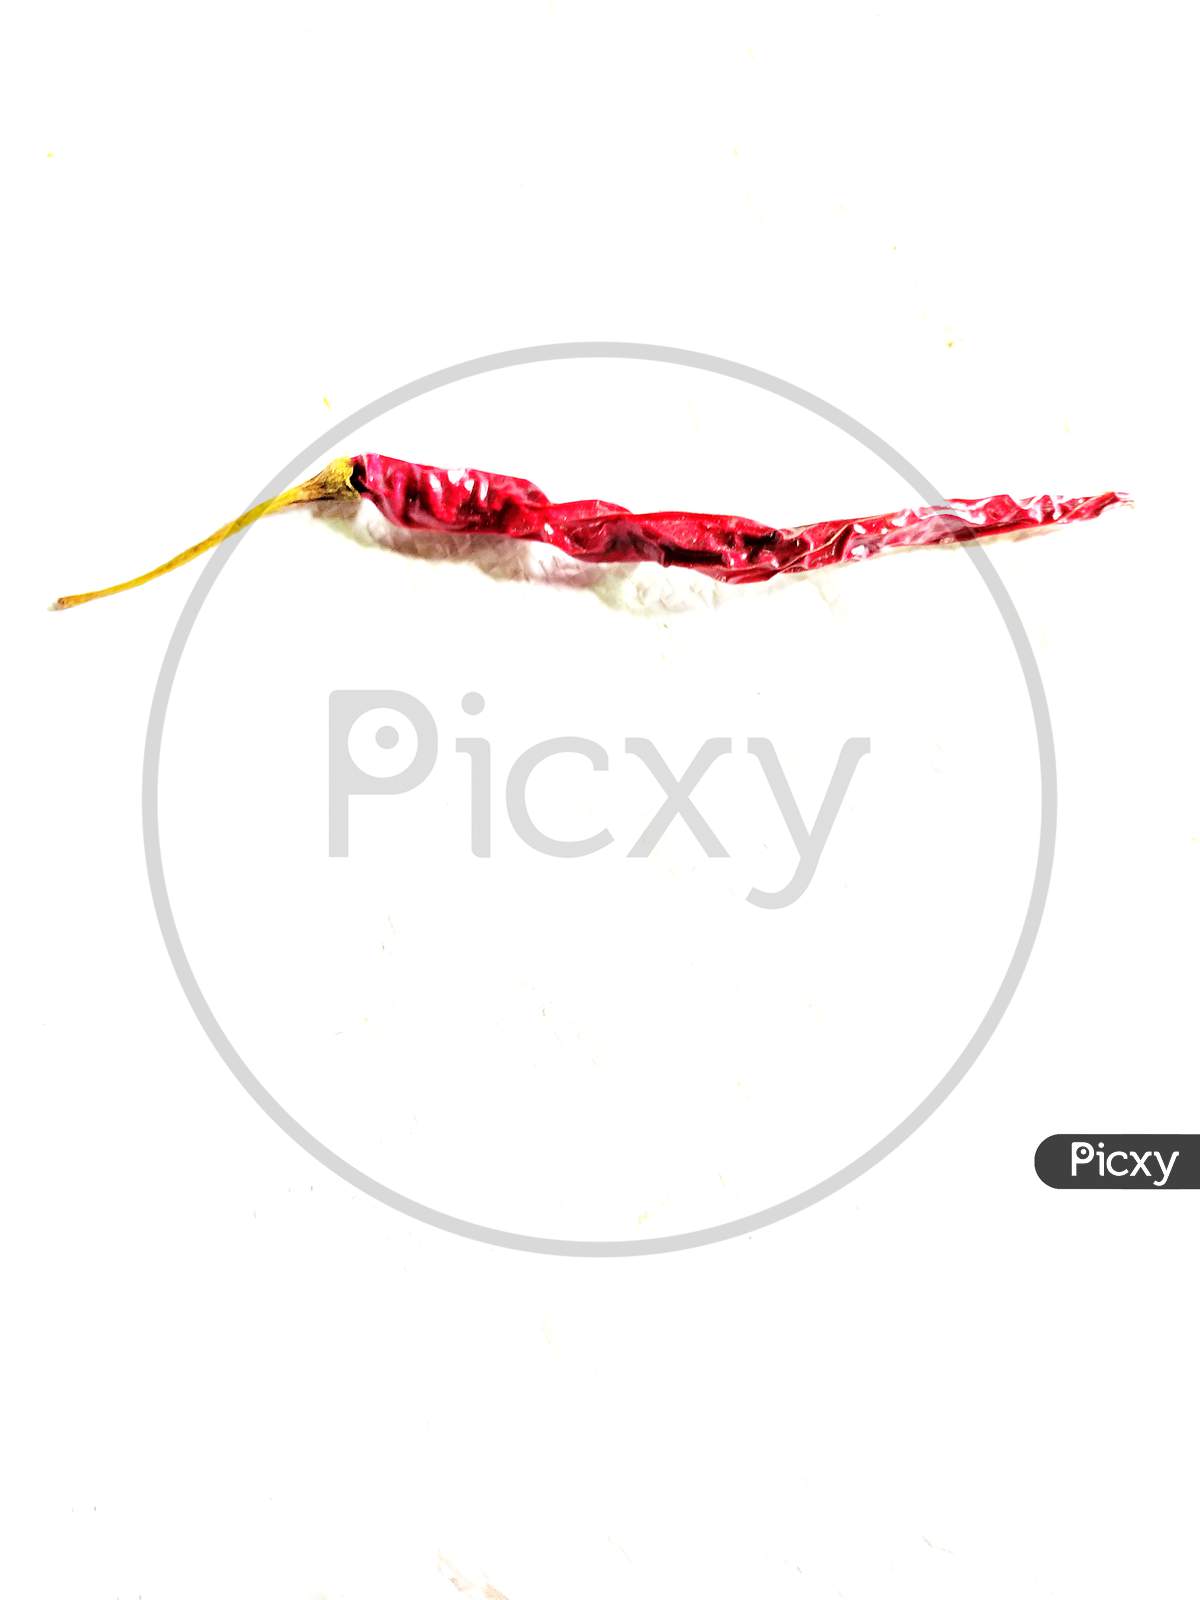 Single Red Chilly,White Background,Shadow